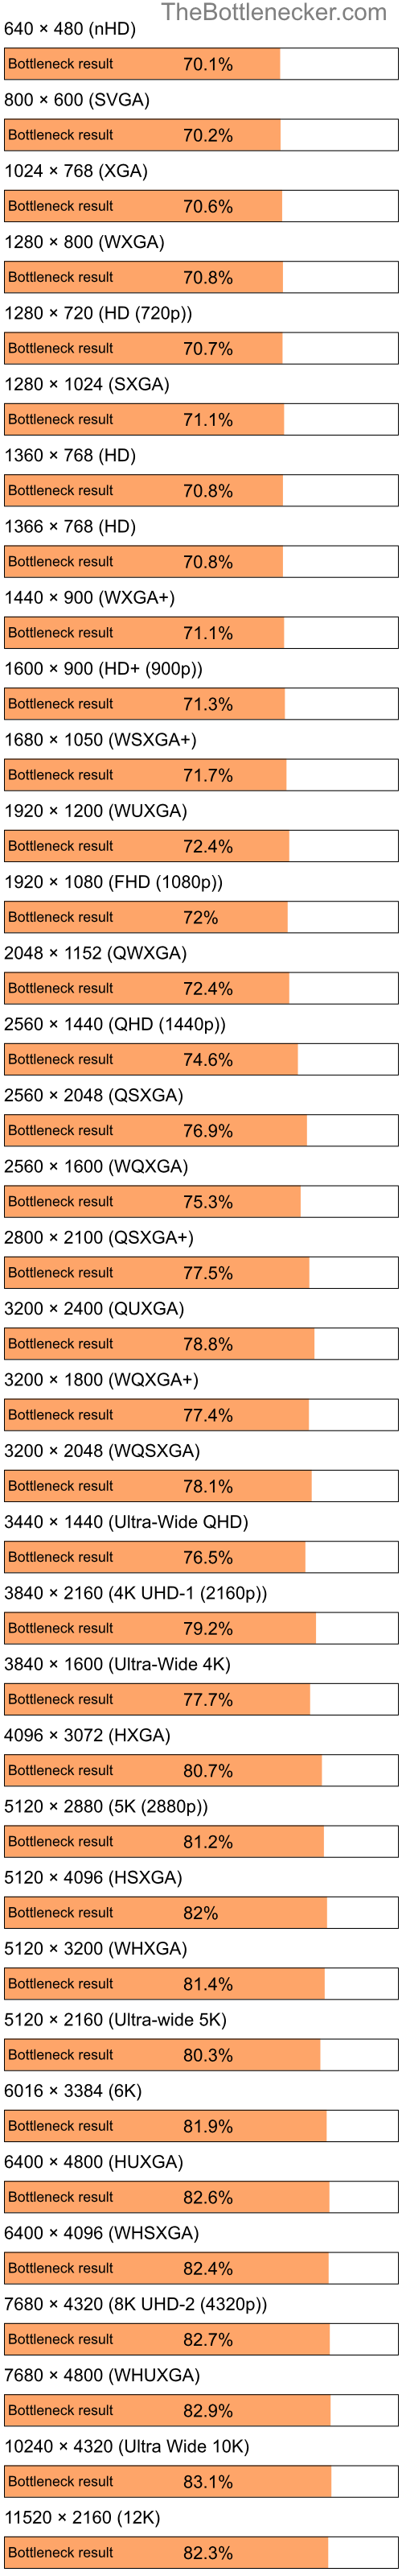 Bottleneck results by resolution for Intel Pentium 4 and AMD Radeon HD 2350 in Graphic Card Intense Tasks